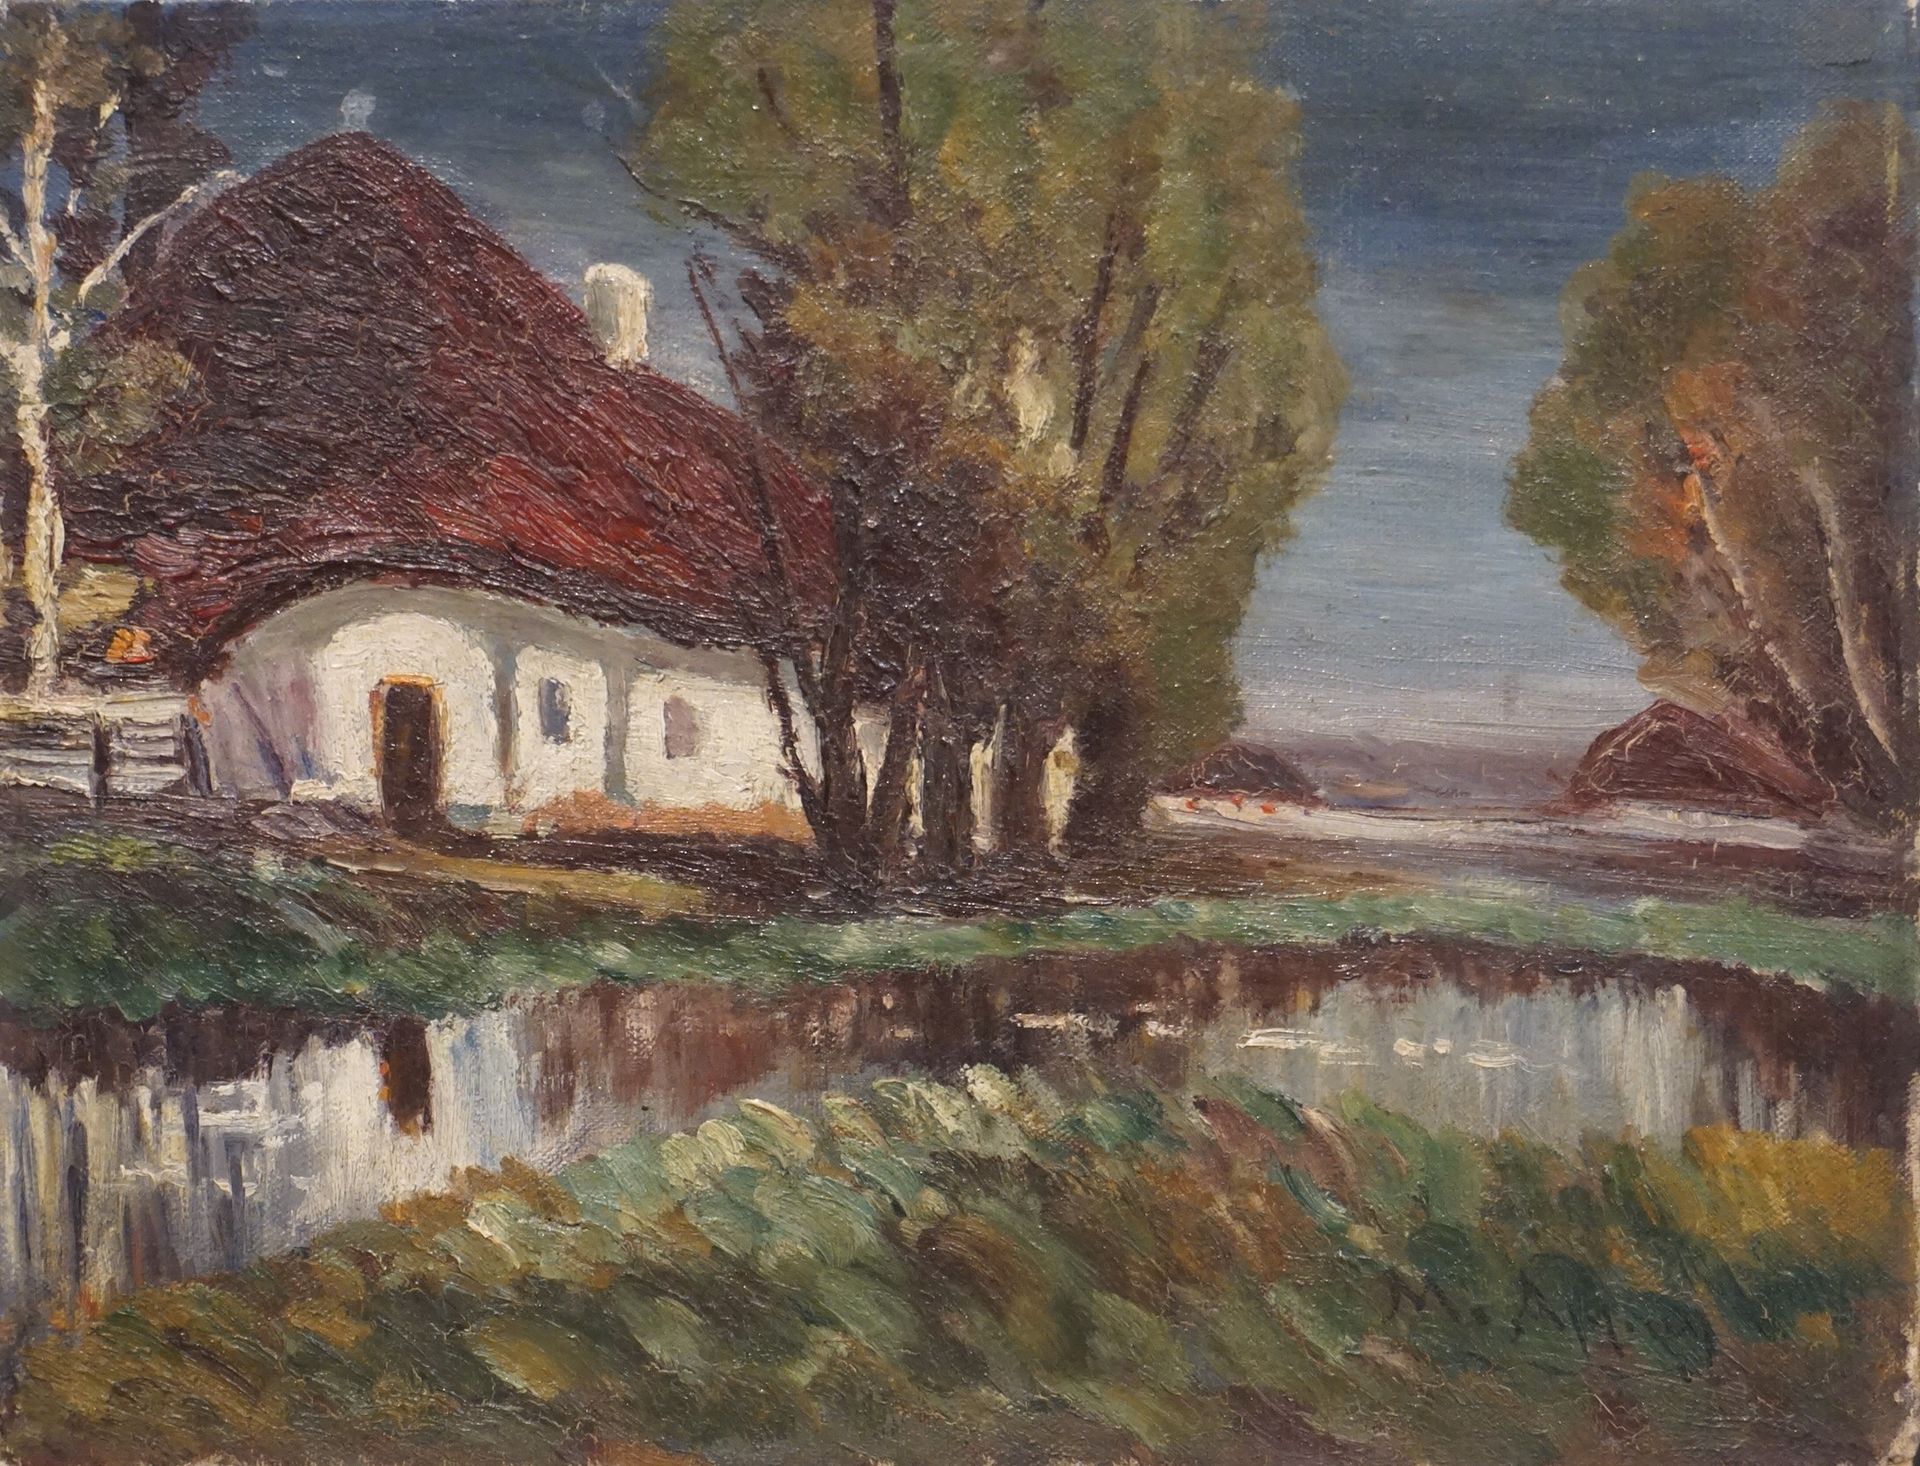 Null "Cottage by the pond", oil on canvas, sbd. 27x35 cm